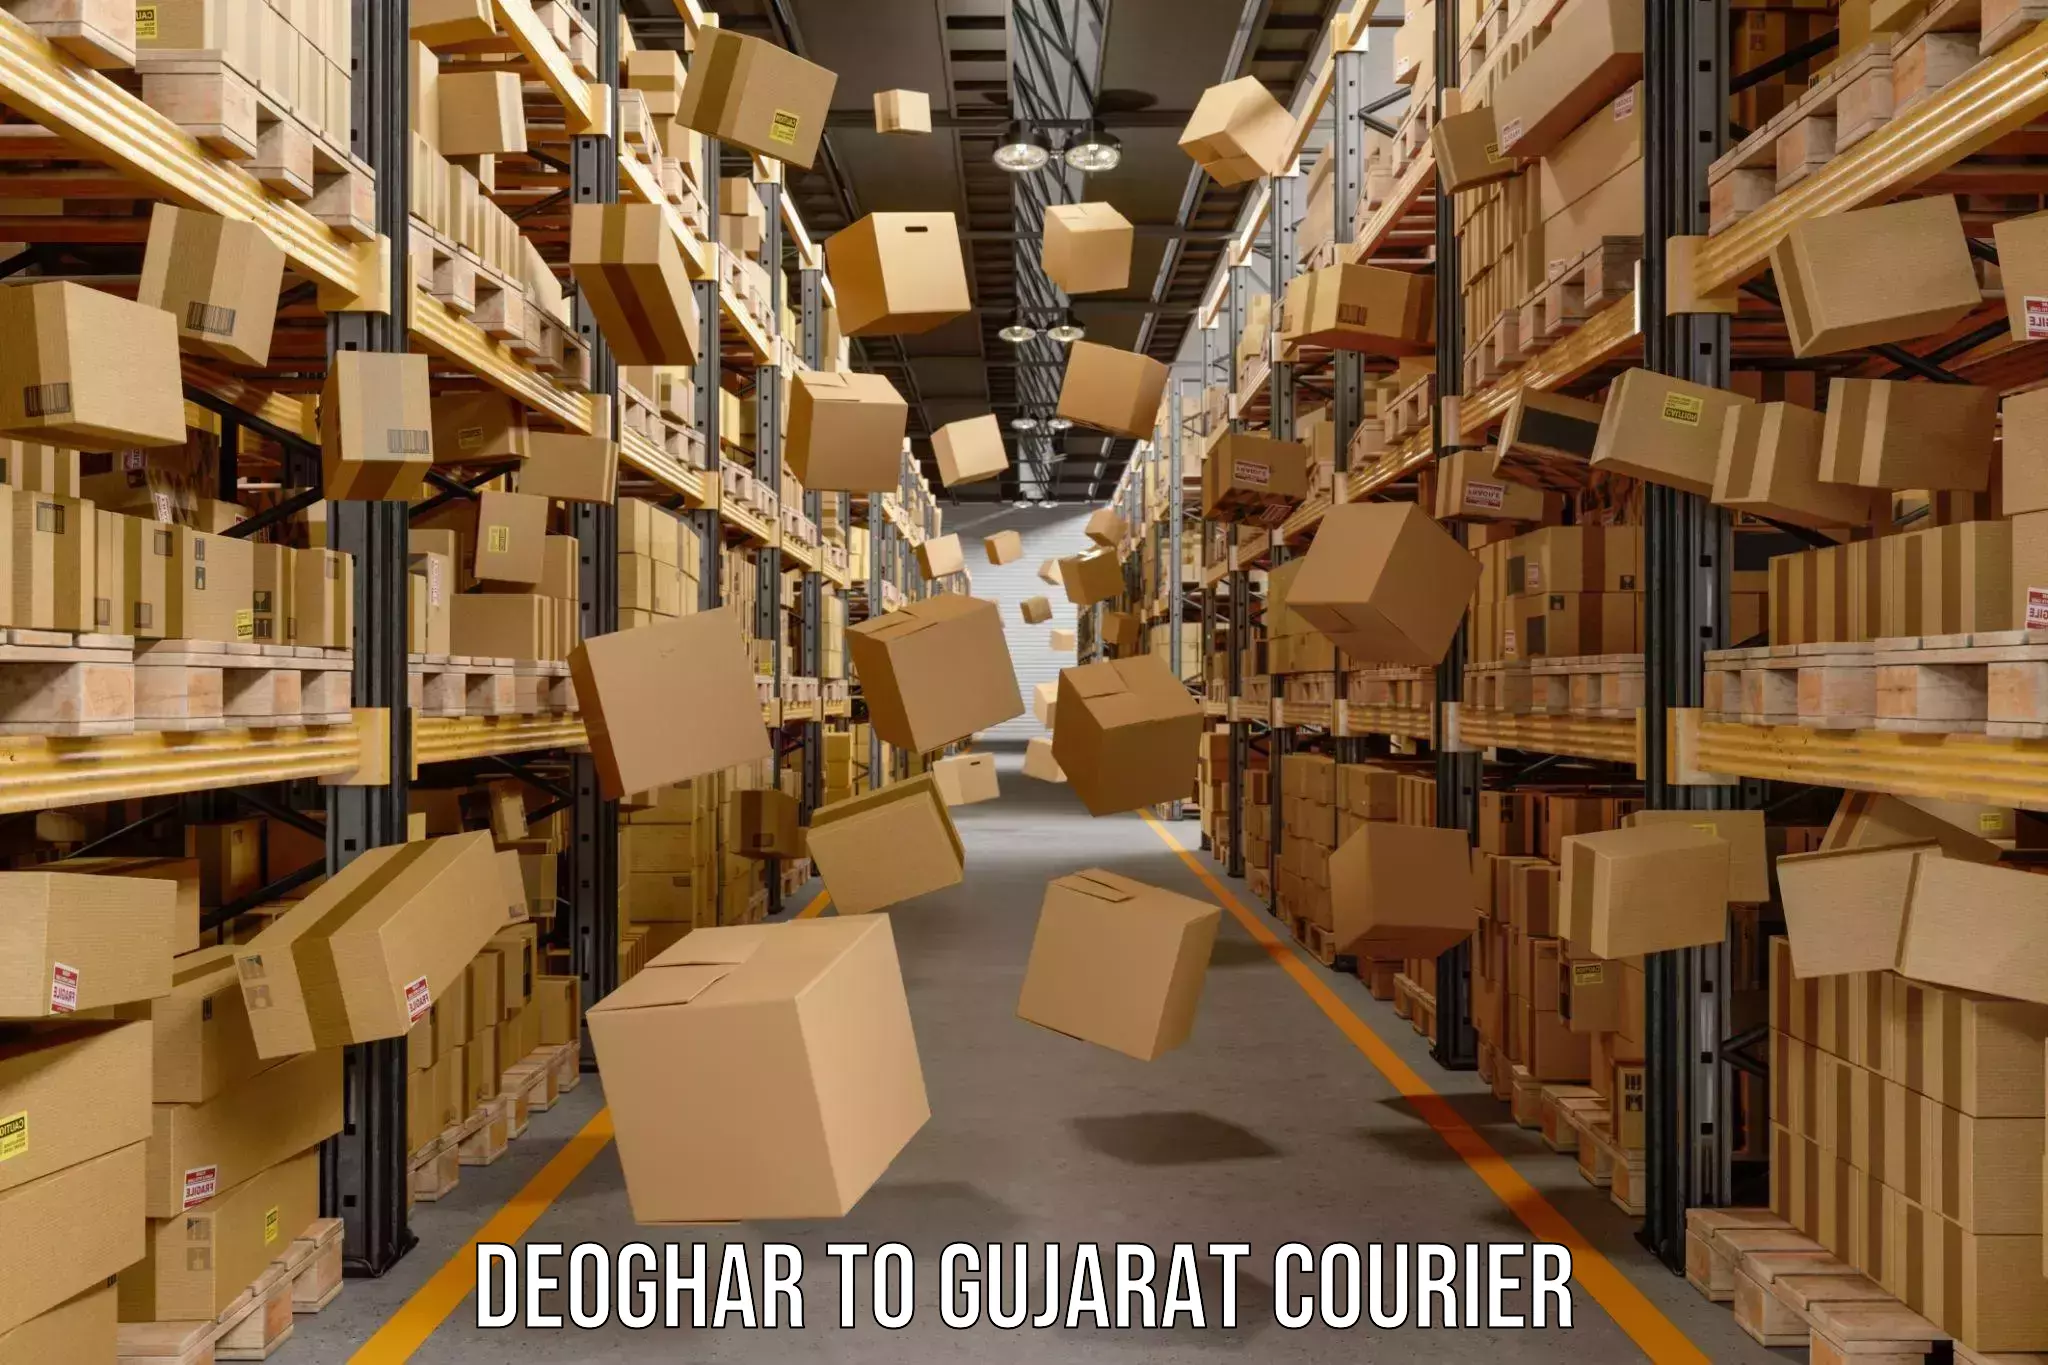 Business delivery service Deoghar to Gujarat